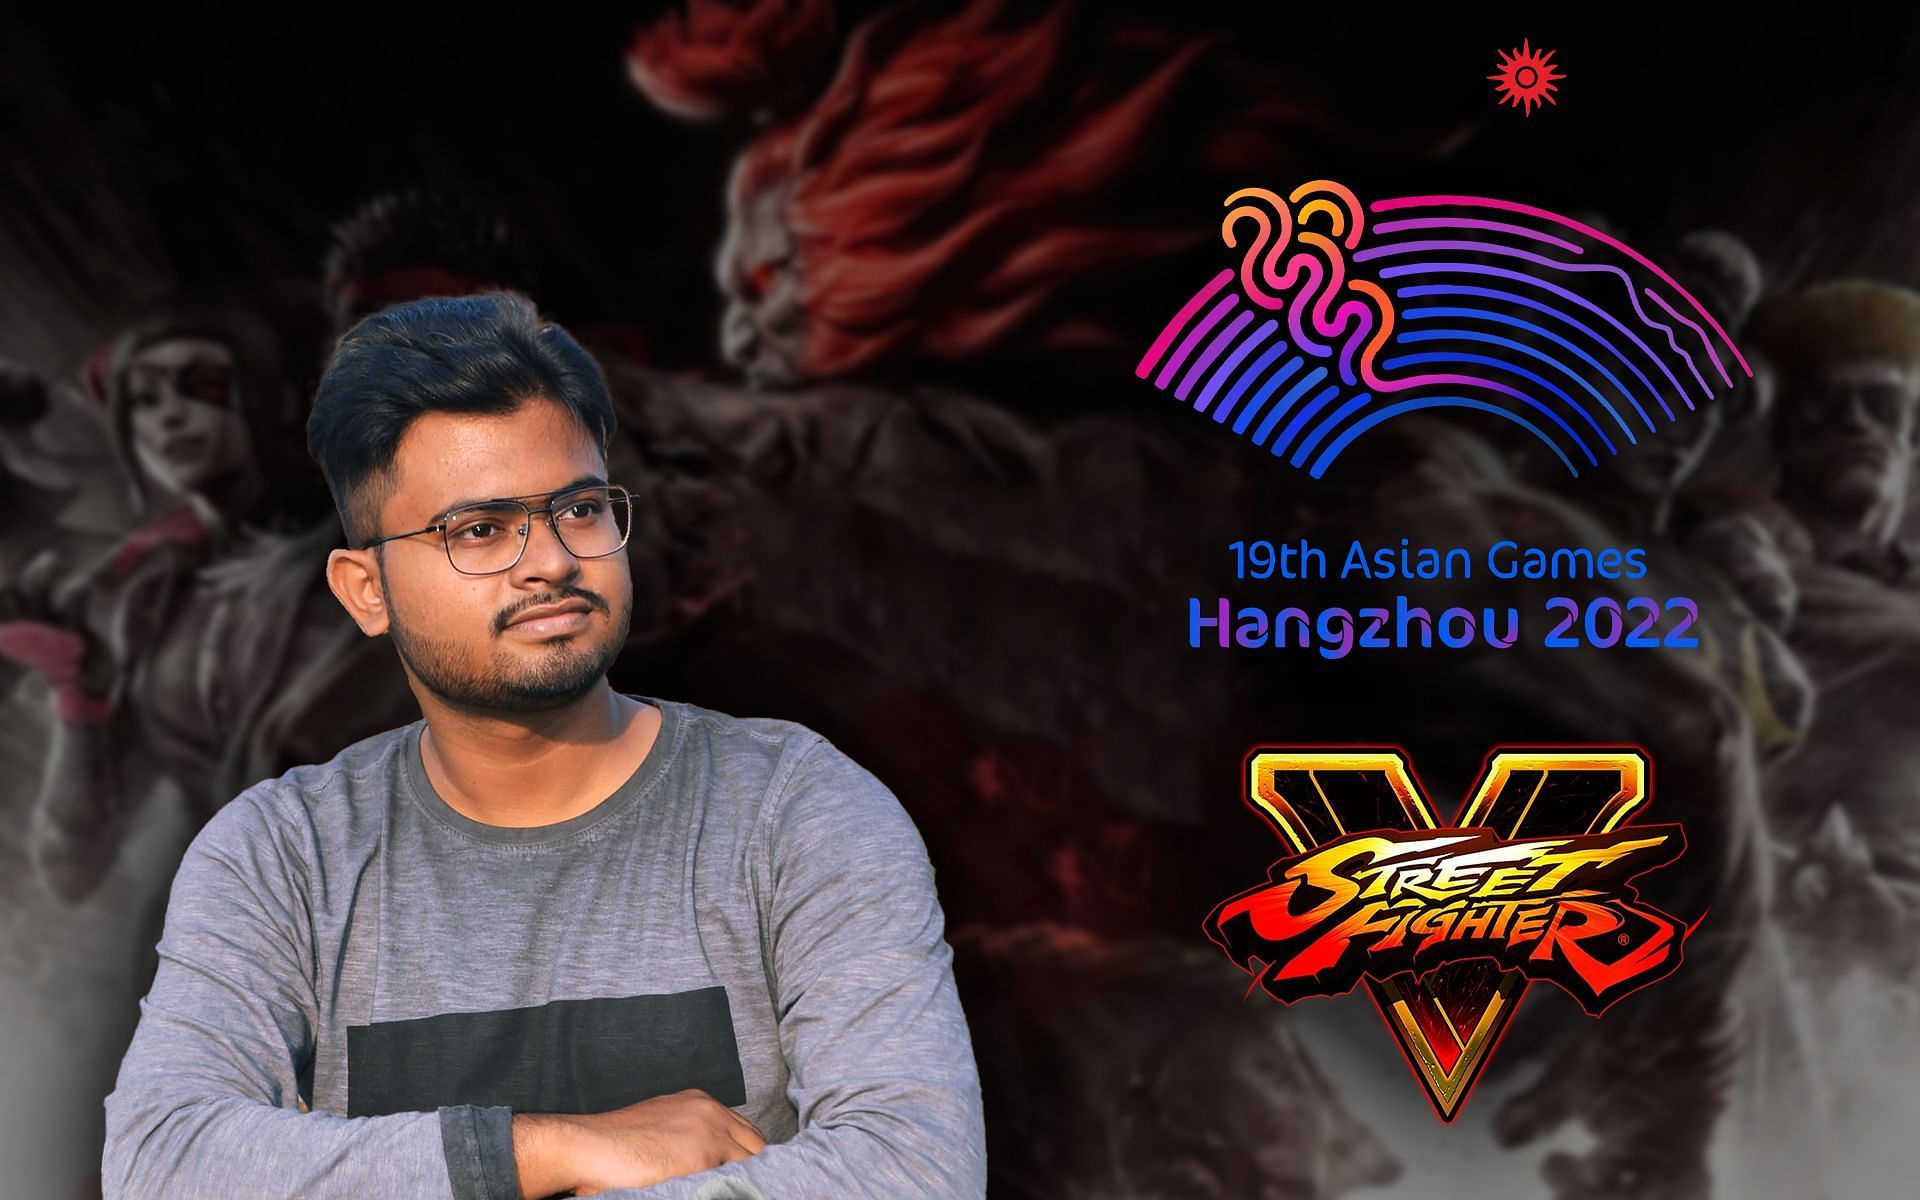 Ayan Biswas is a big fan of the Street Fighter franchise (Image by Sportskeeda)